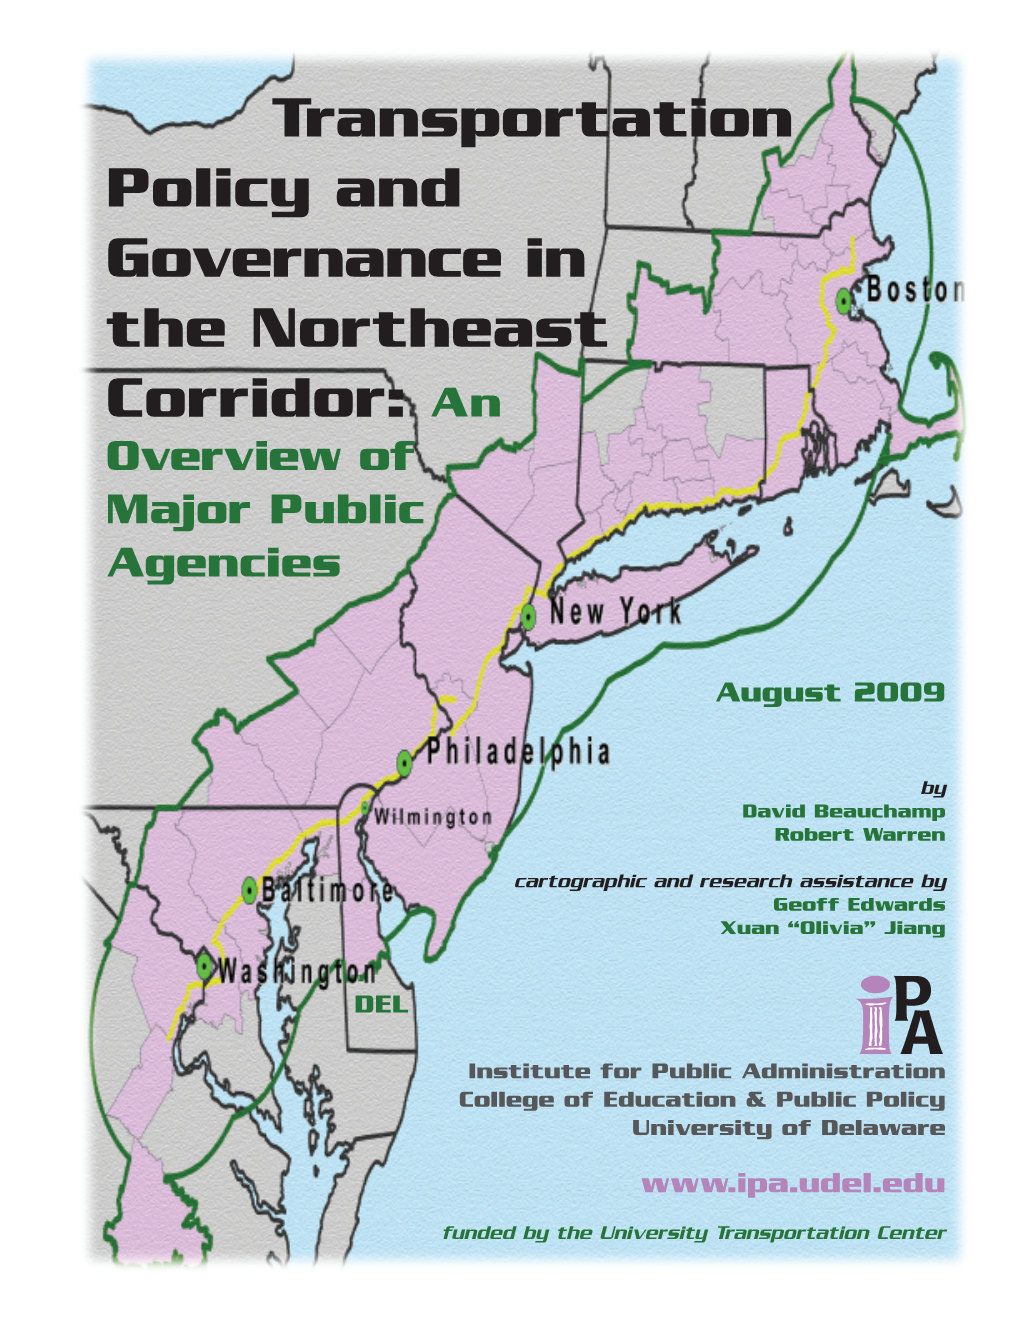 Transportation Policy and Governance in the Northeast Corridor: an Overview of Major Public Agencies